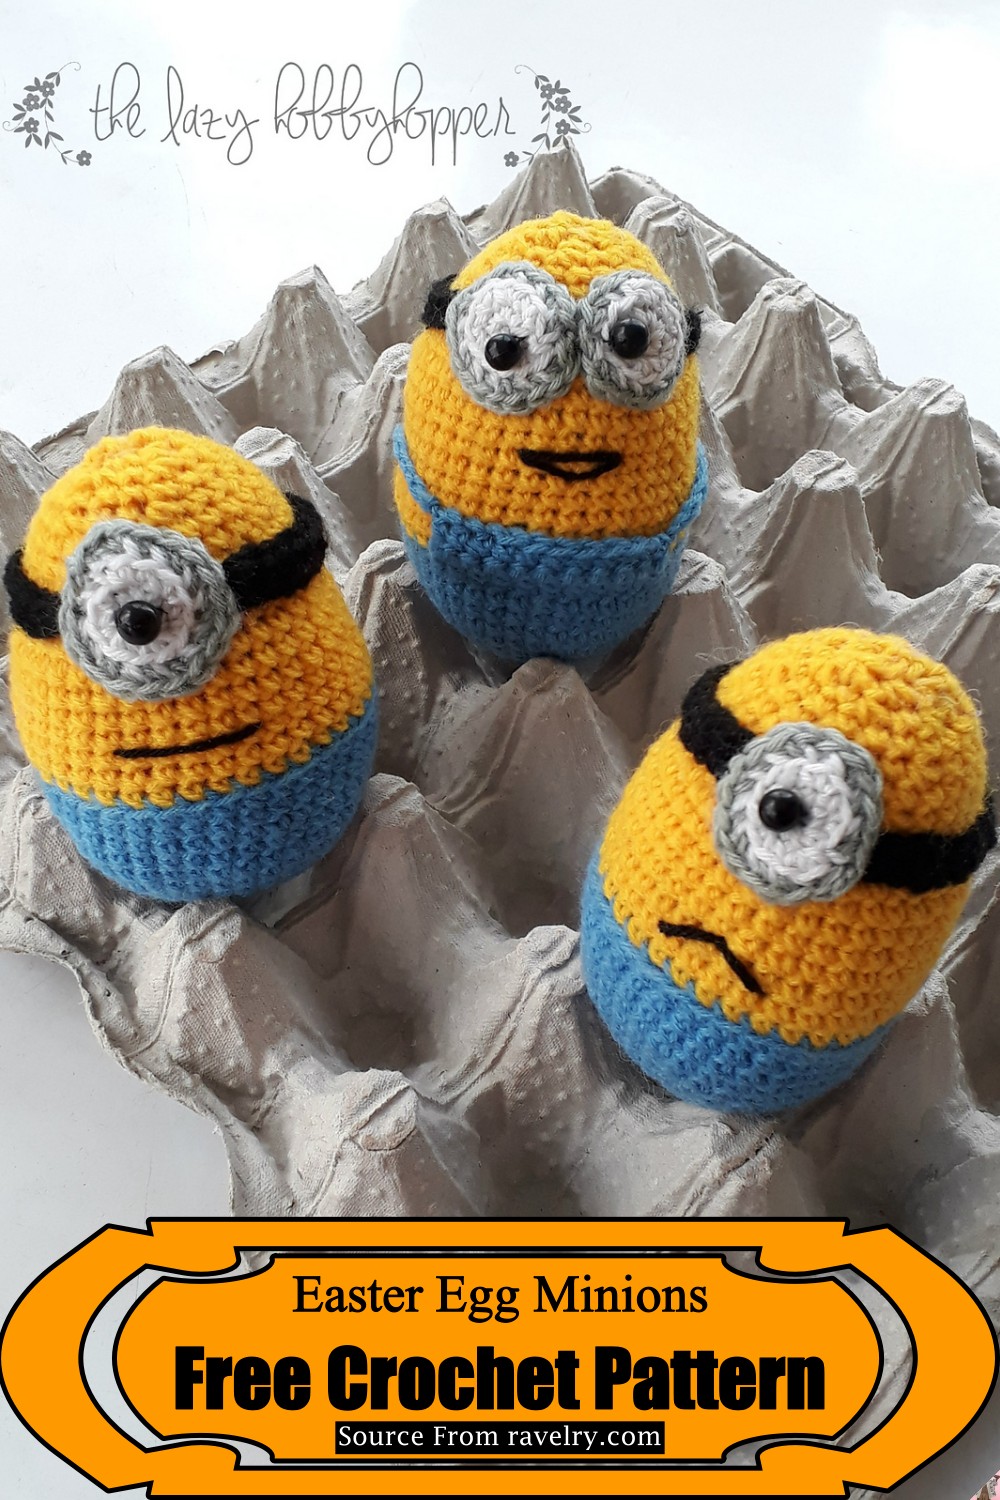 Easter Egg Minions